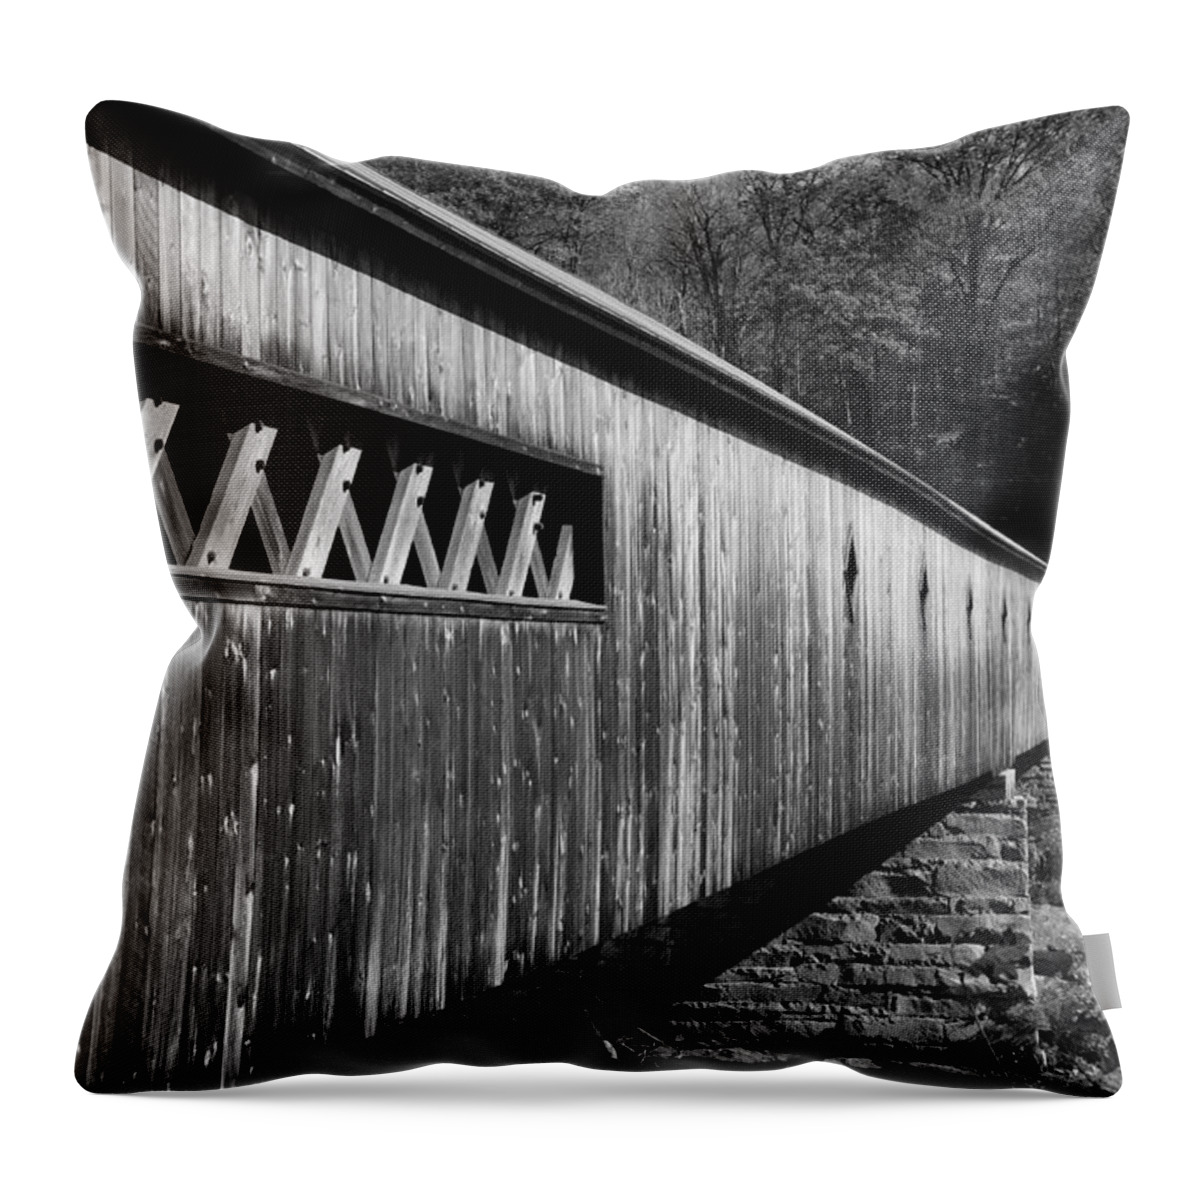 Vermont Throw Pillow featuring the photograph West Dummerston Covered Bridge by Luke Moore